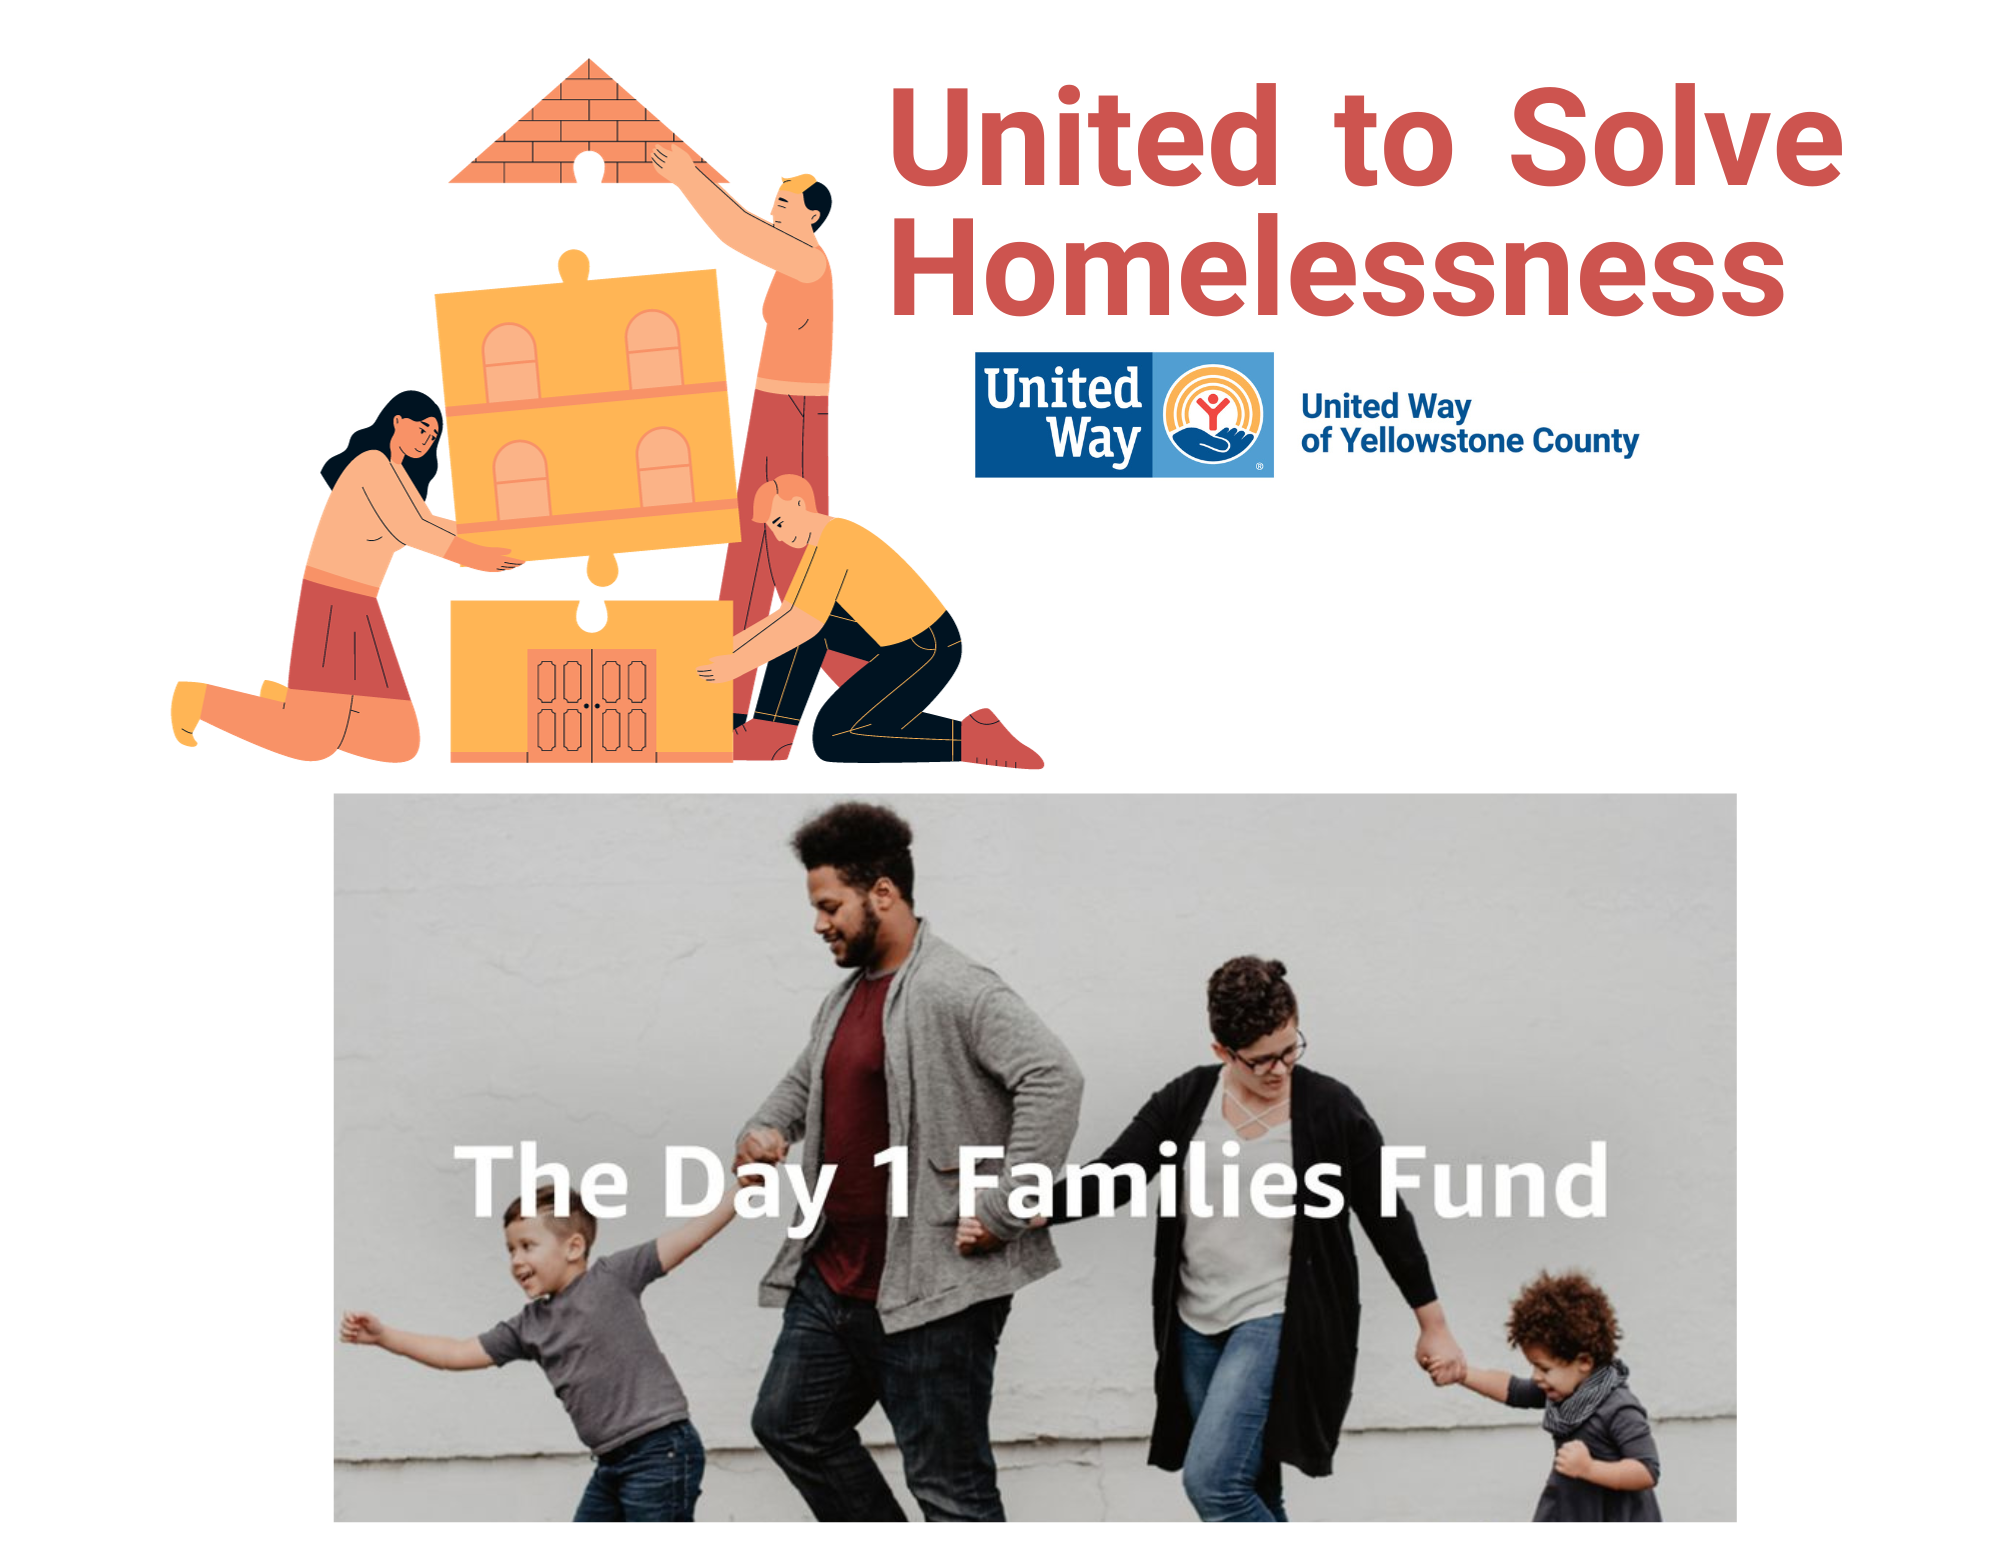 United to Solve Homelessness Image